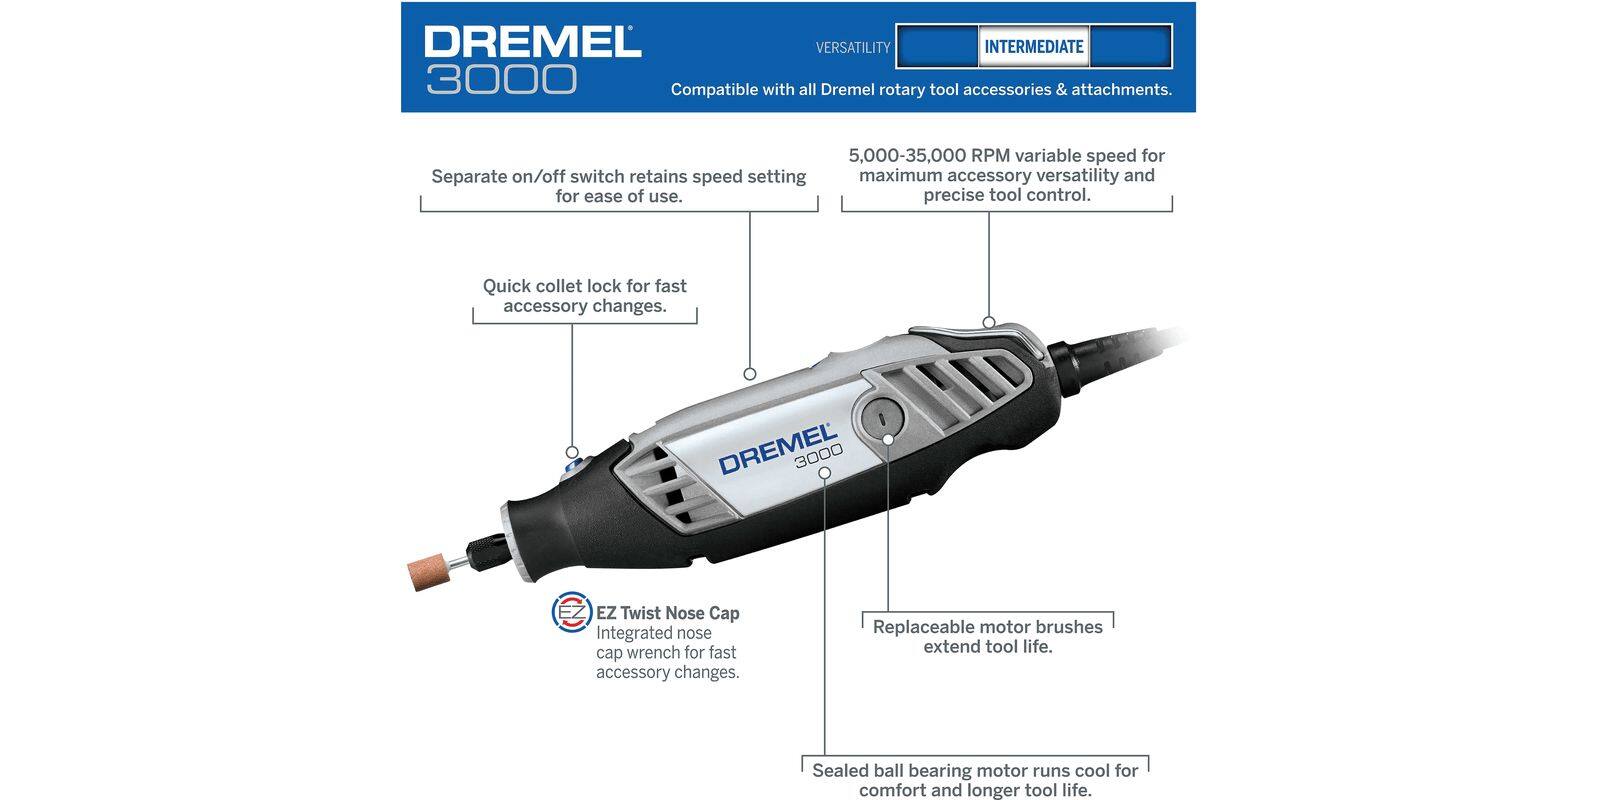 Dremel 3100-1/15 1.2A Variable Speed Rotary Tool Kit with